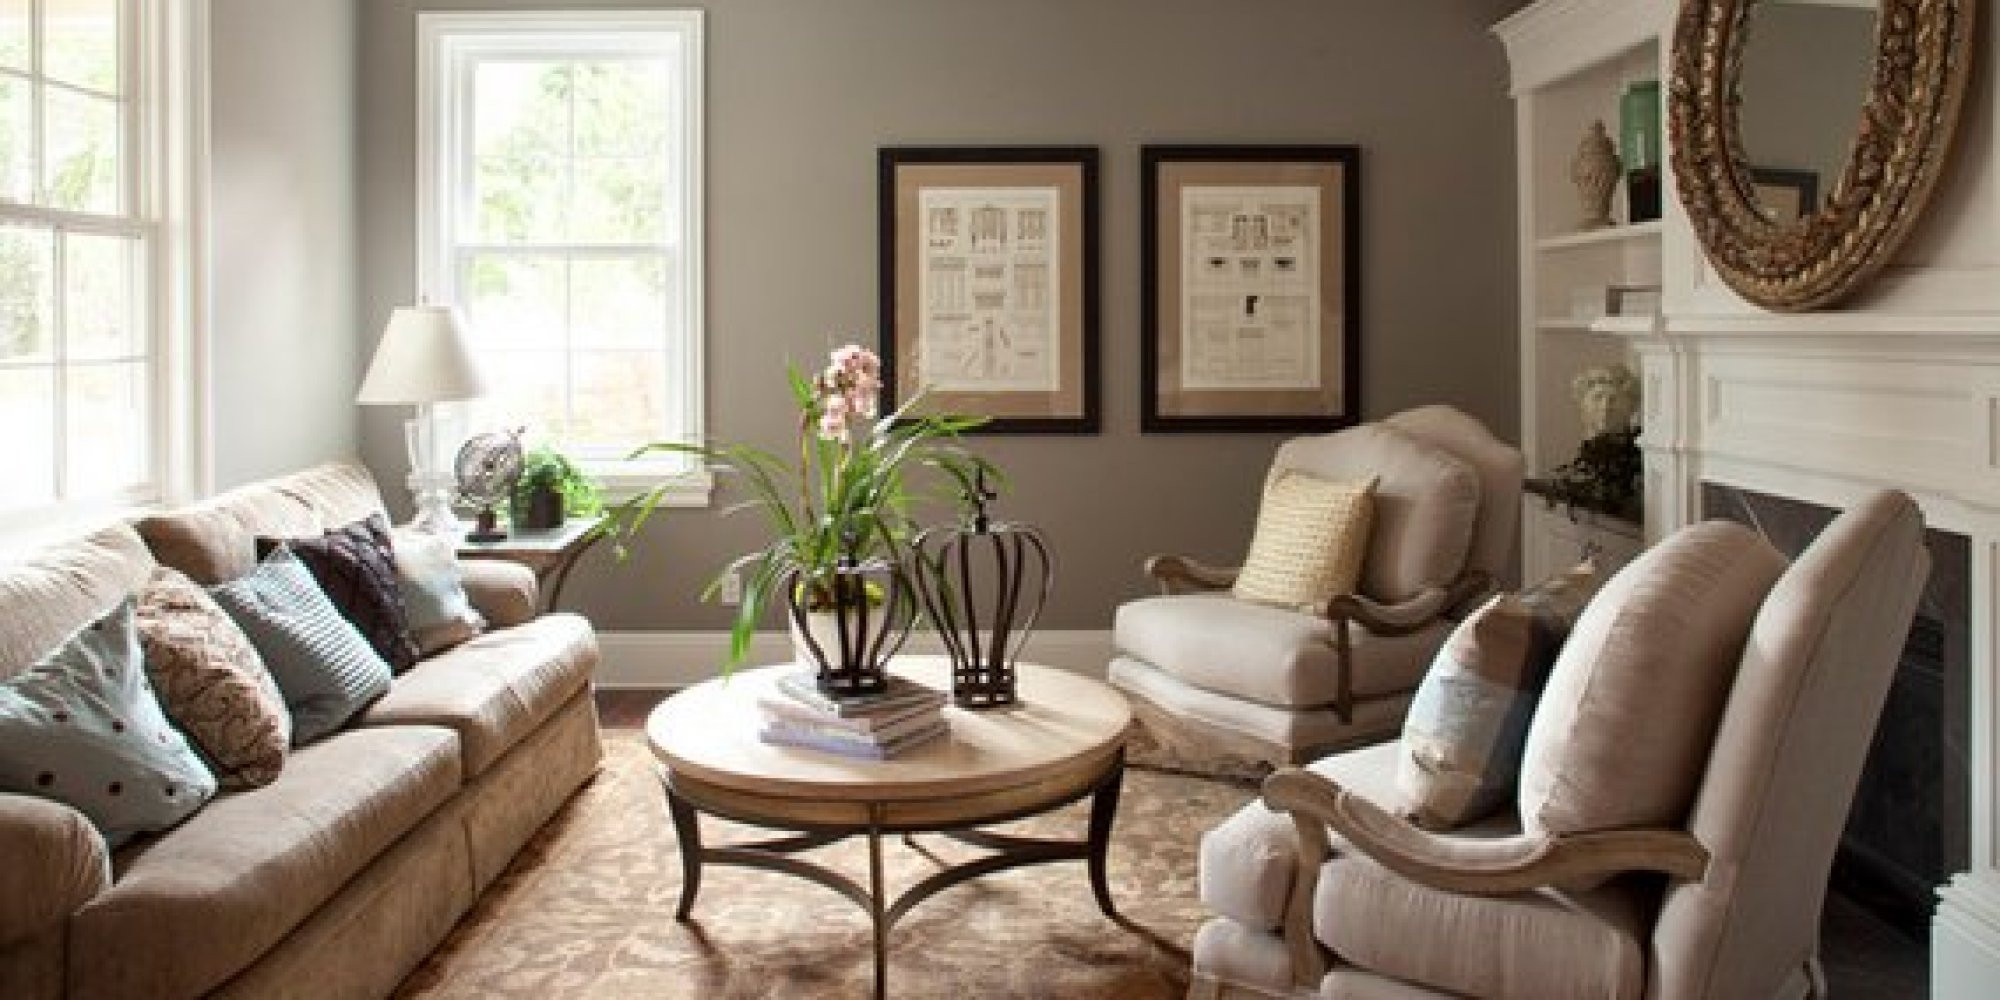 Living Room Wall Paint Colors
 The 6 Best Paint Colors That Work In Any Home